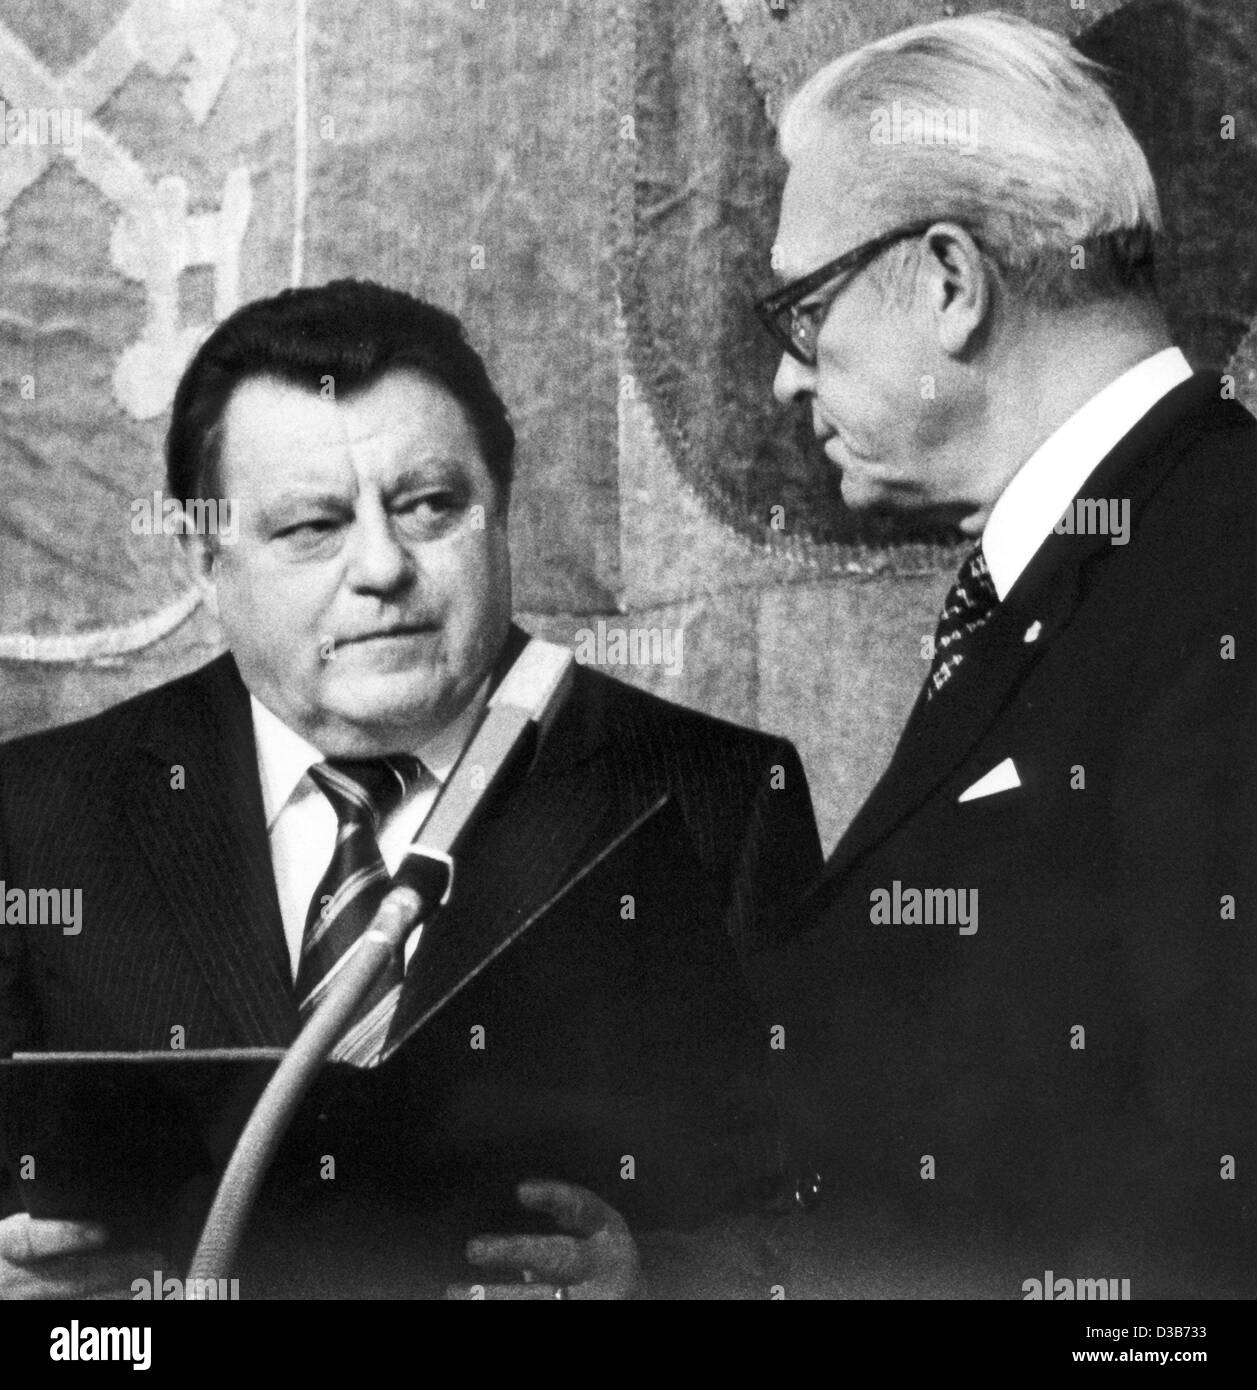 (dpa files) - Franz Josef Strauss, leader of the Christian Social Union (CSU), is sworn in as new Bavarian Premier by Franz Heubl, President of the German Regional Parliament, in Munich, 6 November 1978. Strauss remained Premier of Bavaria until his death on 3 October 1988. Stock Photo